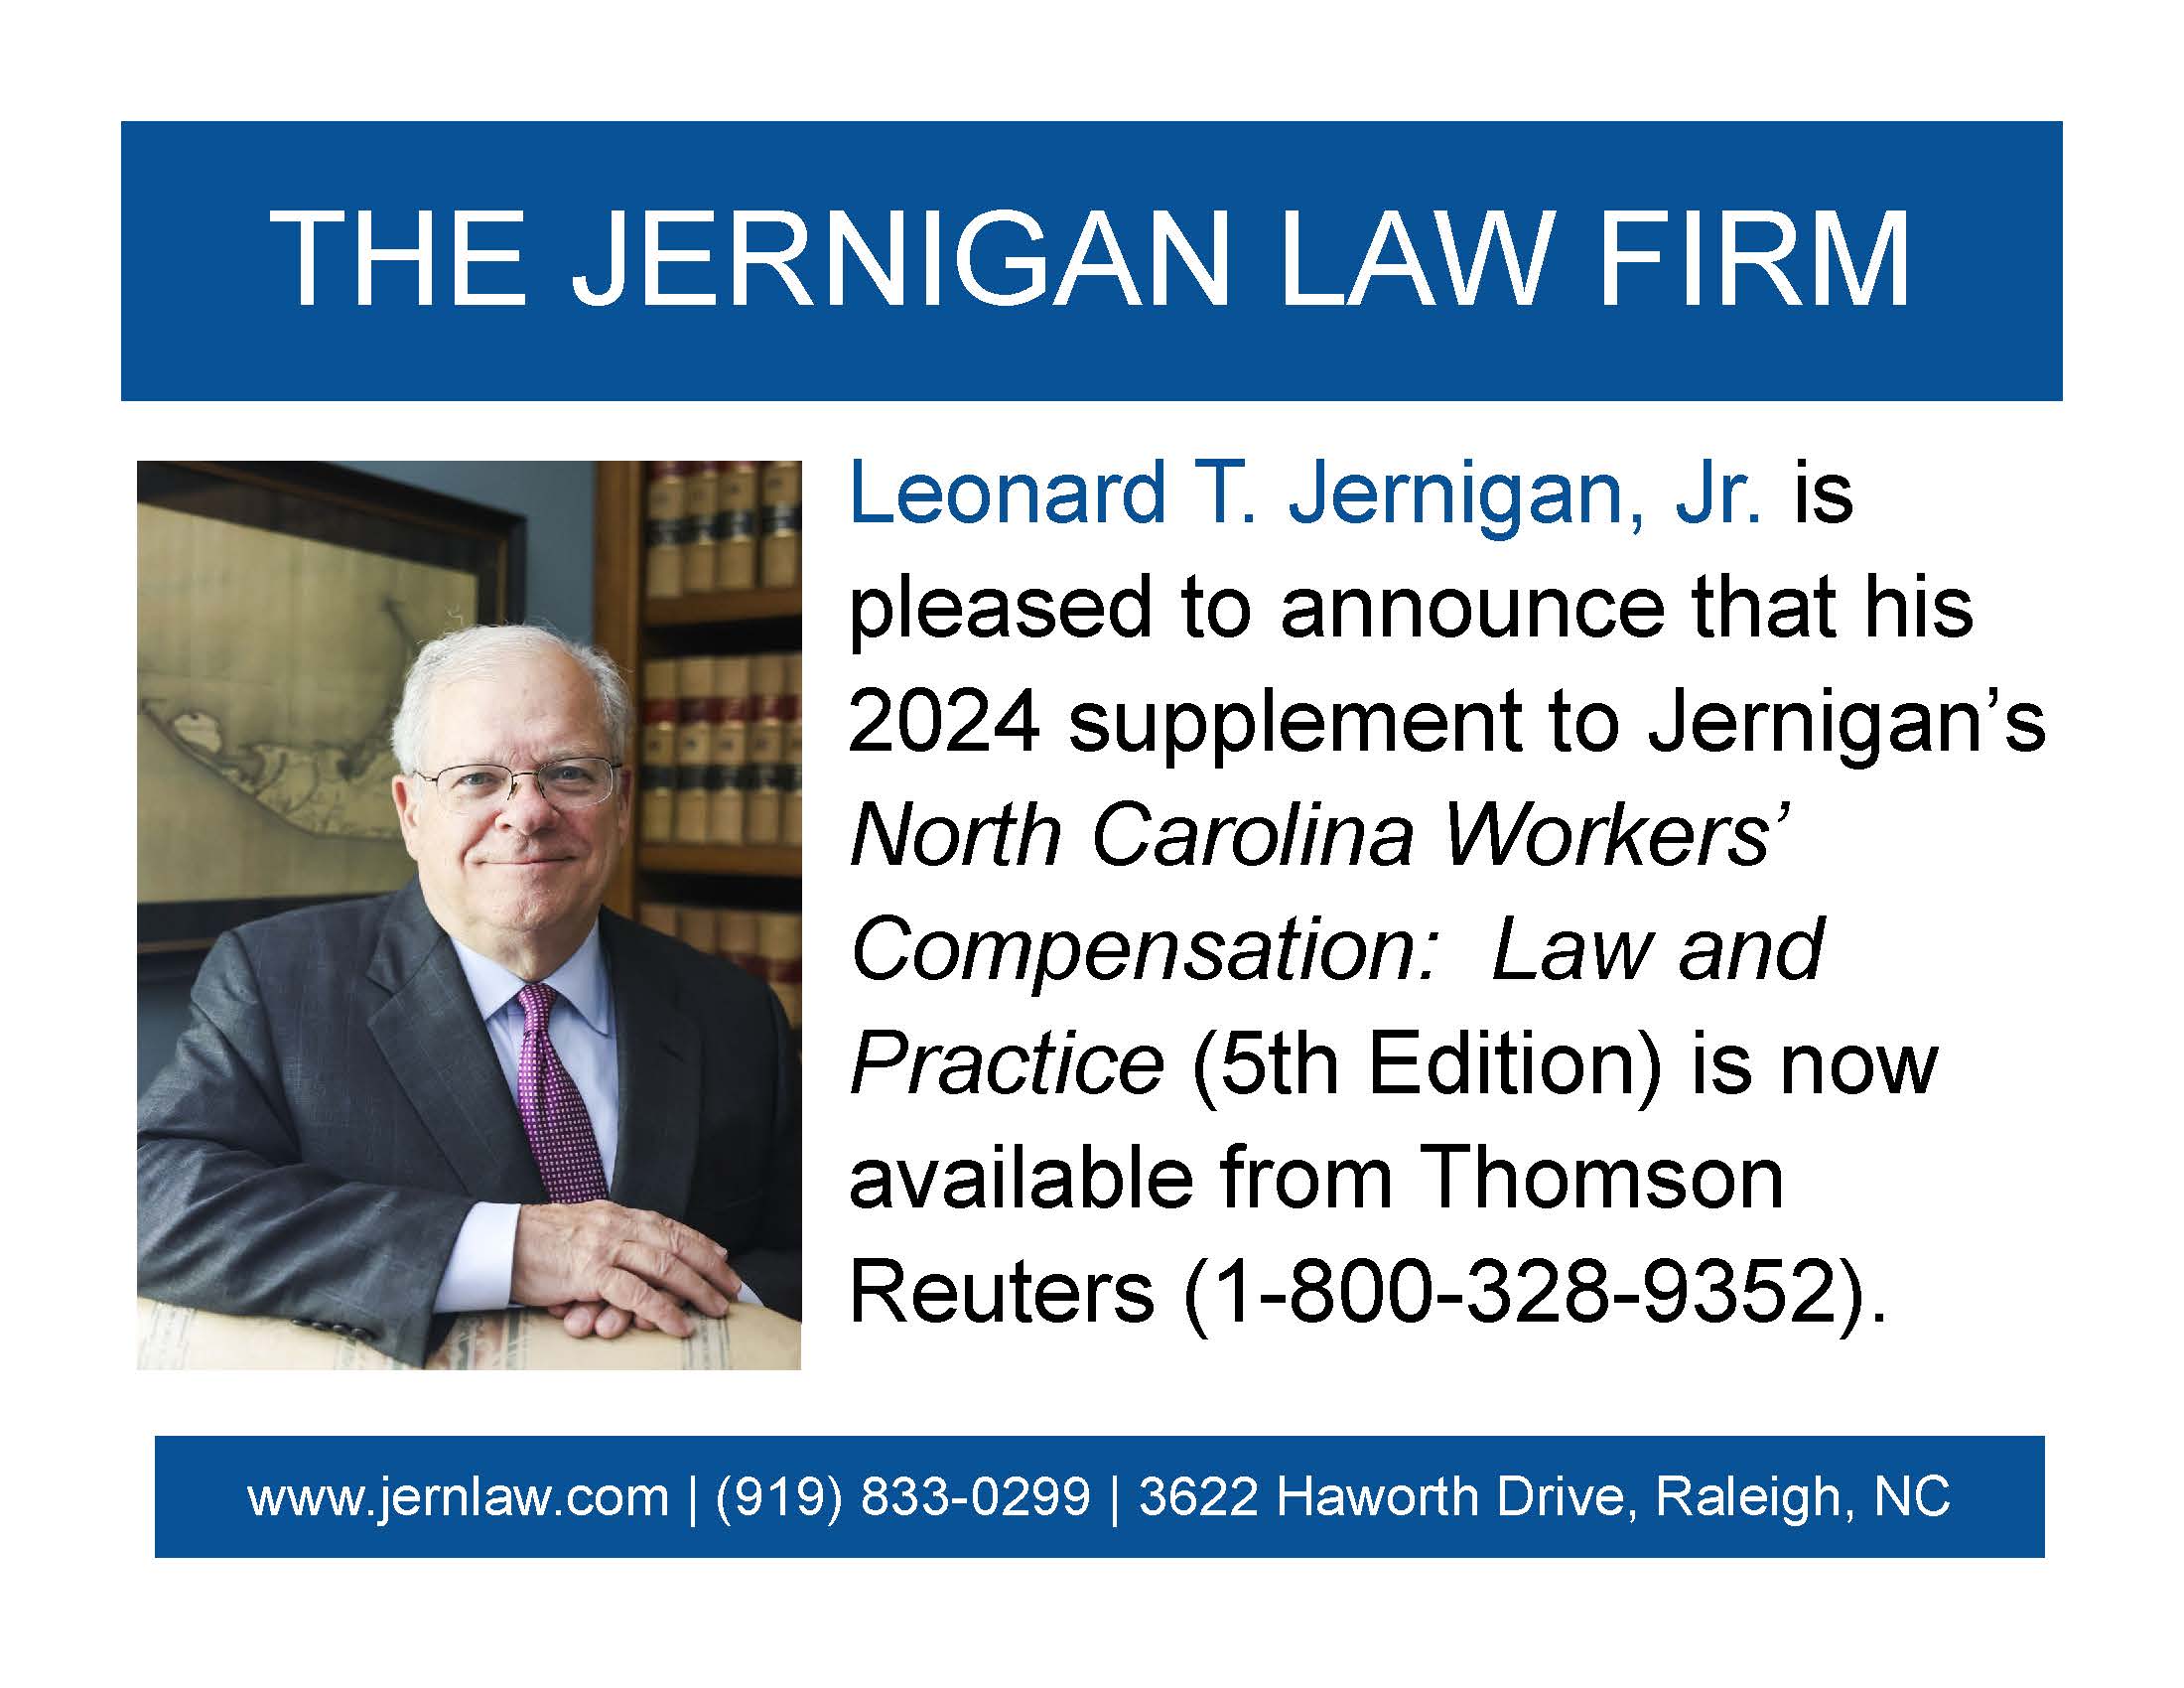 The Jernigan ad reads: "Leonard T. Jernigan, Jr. is pleased to announce that his 2024 supplement to Jernigan’s North Carolina Workers’ Compensation: Law and Practice (5th Edition) is now available from Thomson Reuters (1-800-328-9352)."